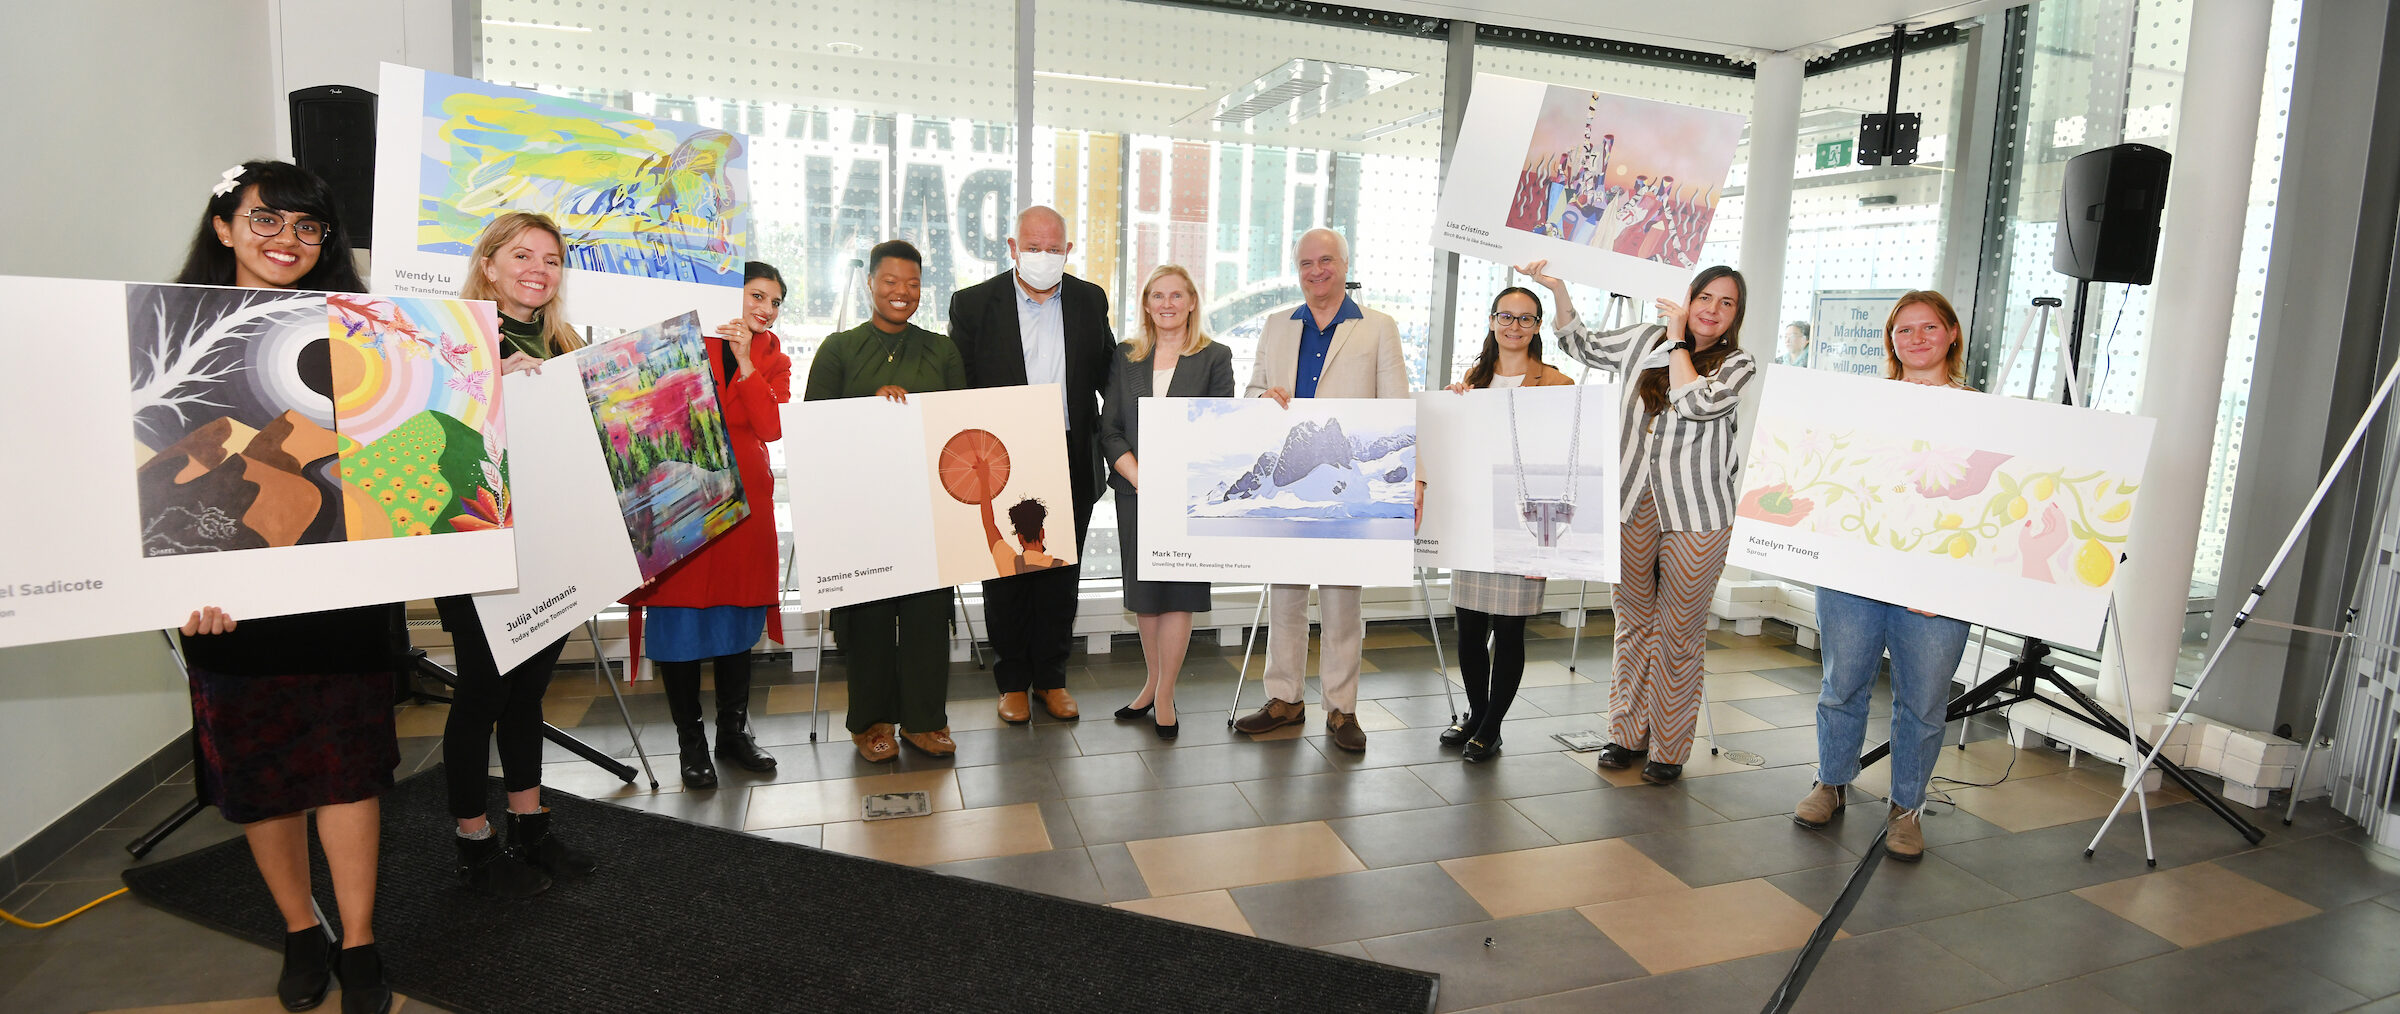 Artists and their artwork selected for the Markham Hoarding Art Installation "Right the Future"